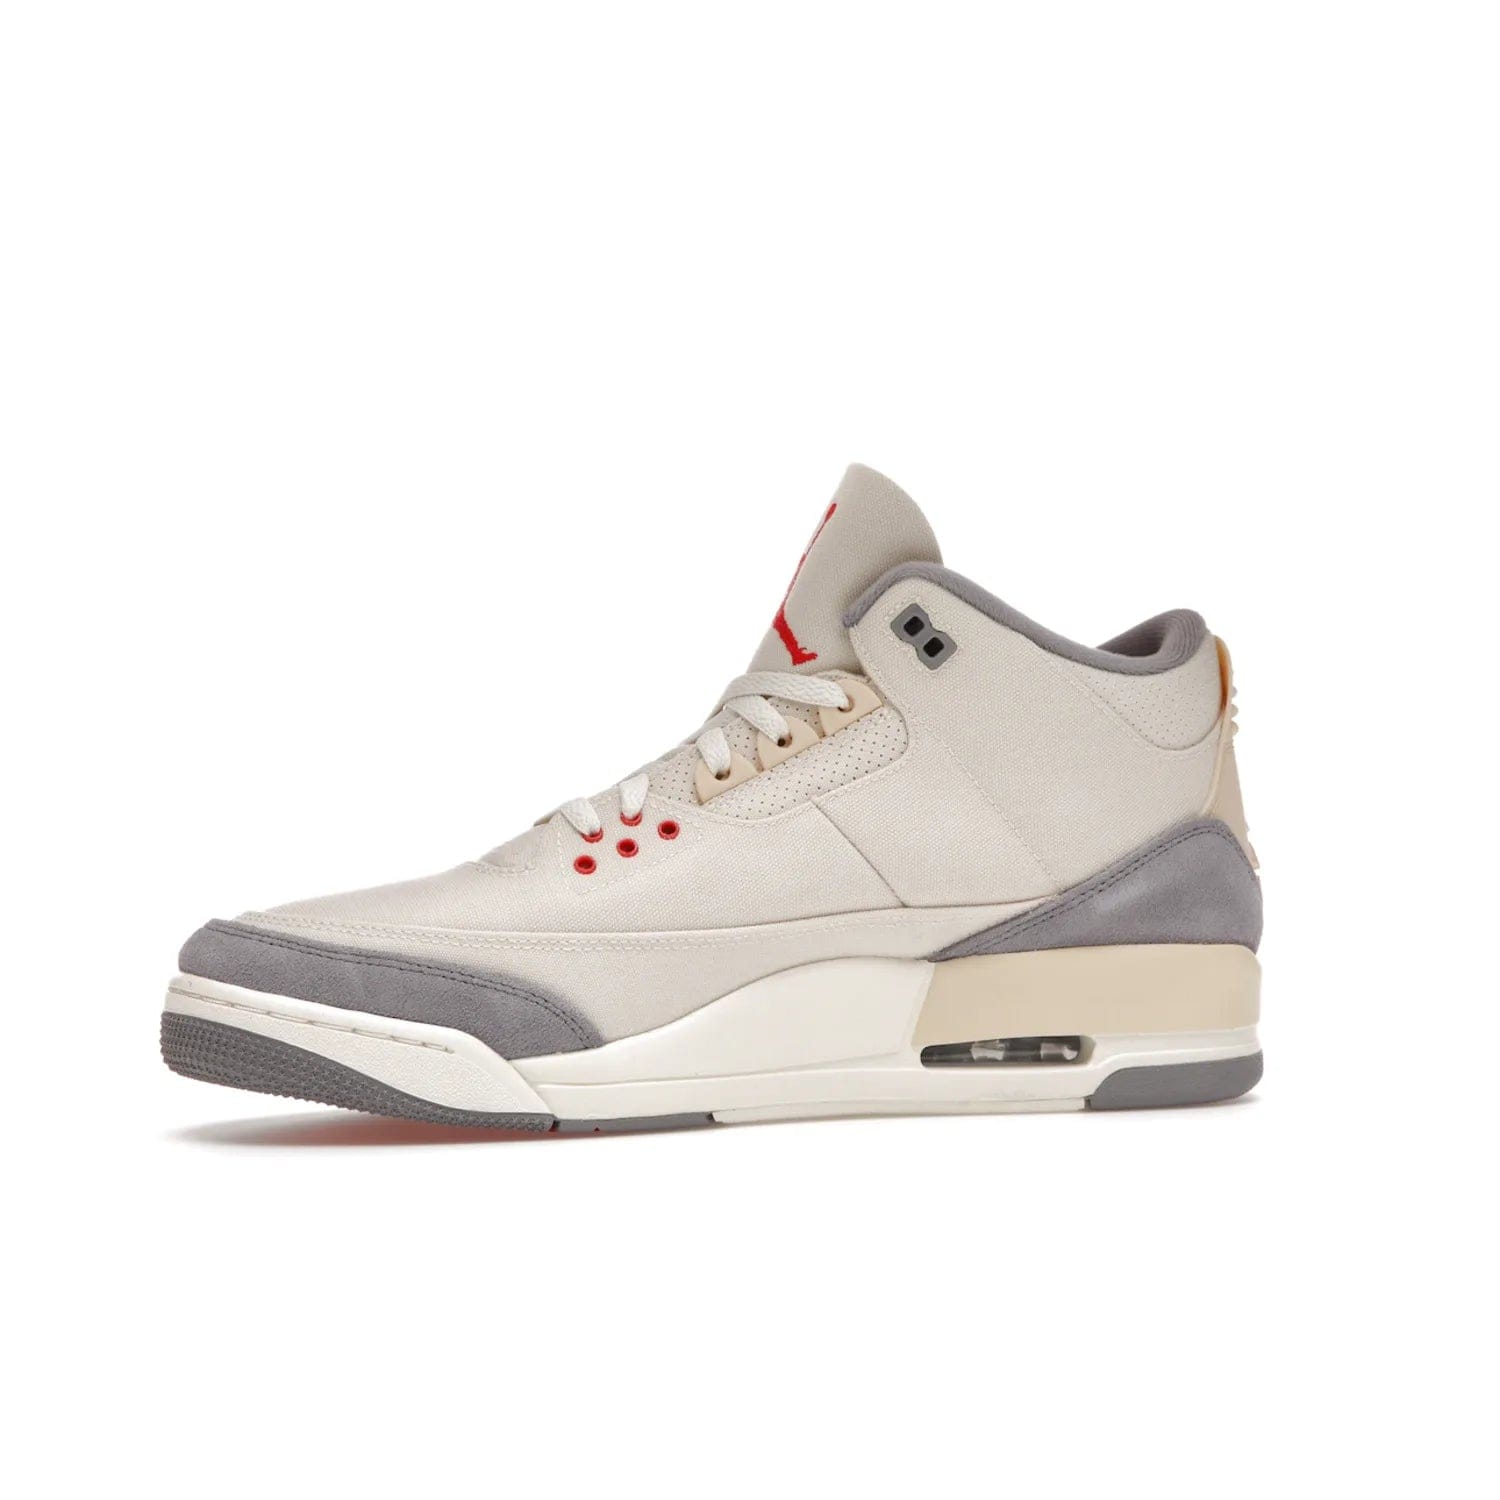 Jordan 3 Retro Muslin - Image 17 - Only at www.BallersClubKickz.com - Eye-catching Air Jordan 3 Retro Muslin in a neutral palette of grey, cream, and red. Featuring canvas upper, suede overlays and white/grey Air Max sole. Available in March 2022.